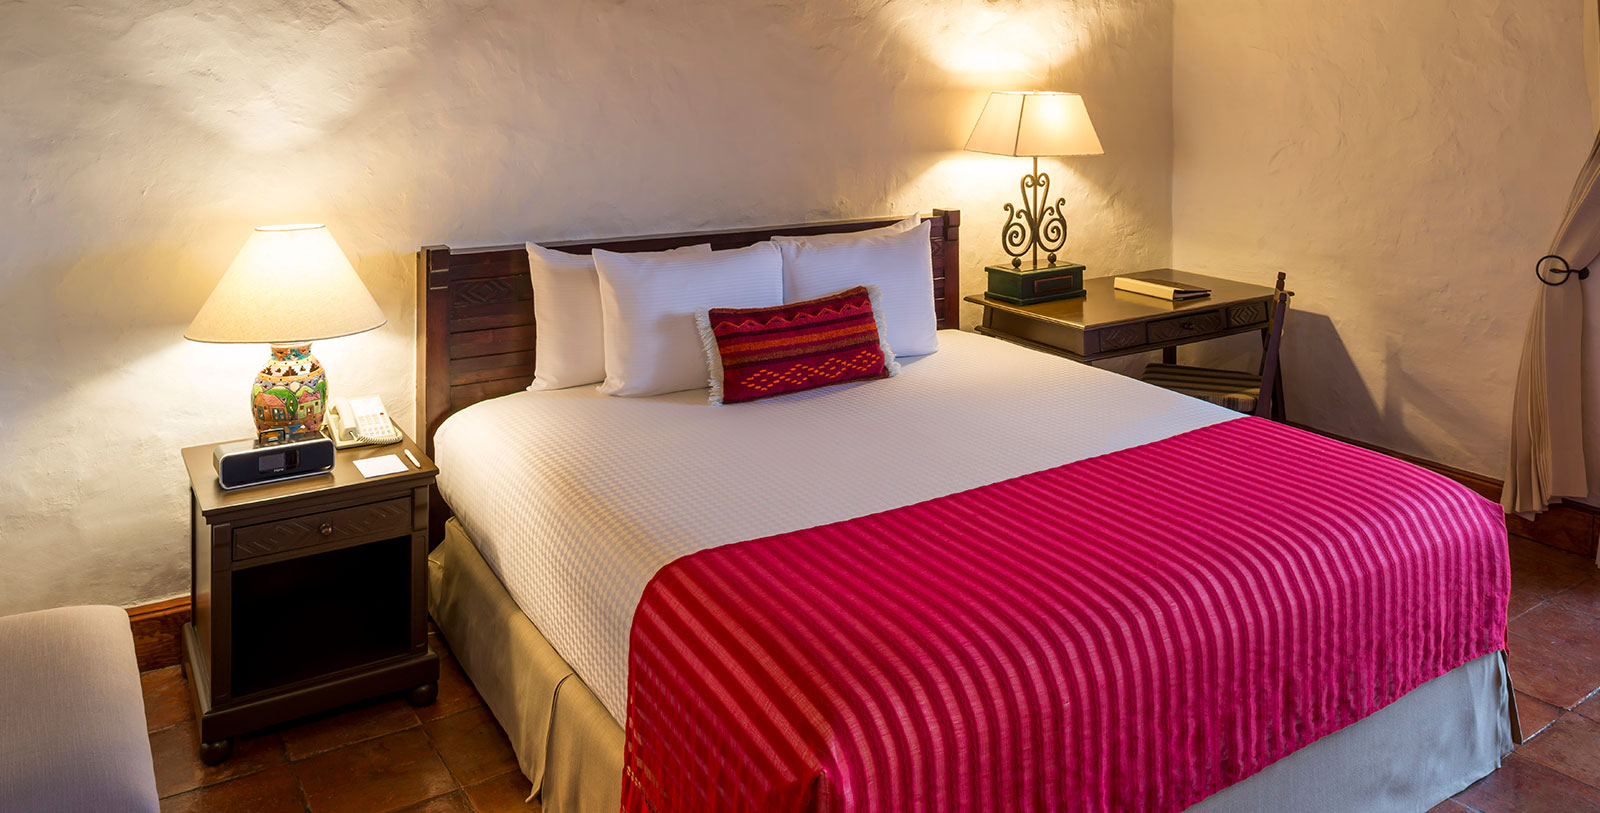 Image of Guestroom Interior Quinta Real Oaxaca, 1576, Member of Historic Hotels Worldwide, in Oaxaca, Mexico, Accommodations